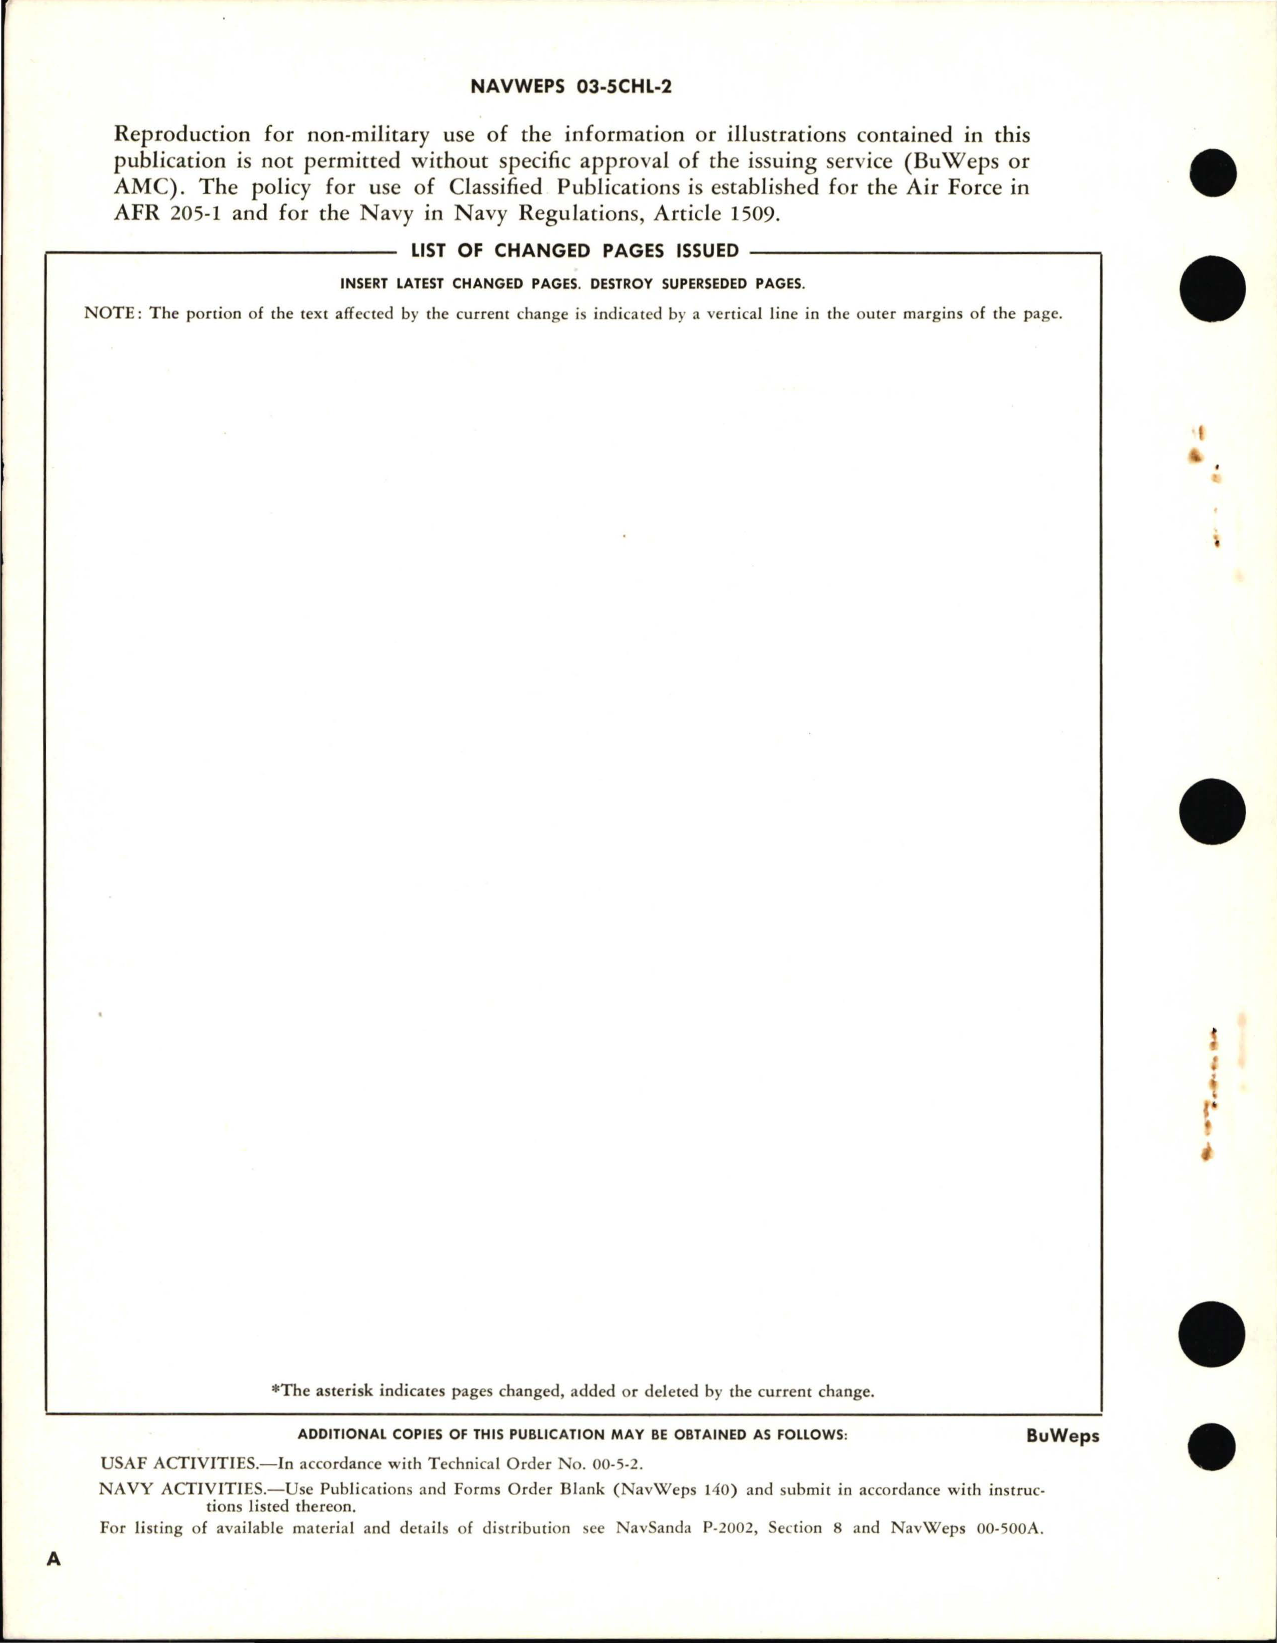 Sample page 2 from AirCorps Library document: Overhaul Instructions for Linear Trim Actuator Assembly 1608M1